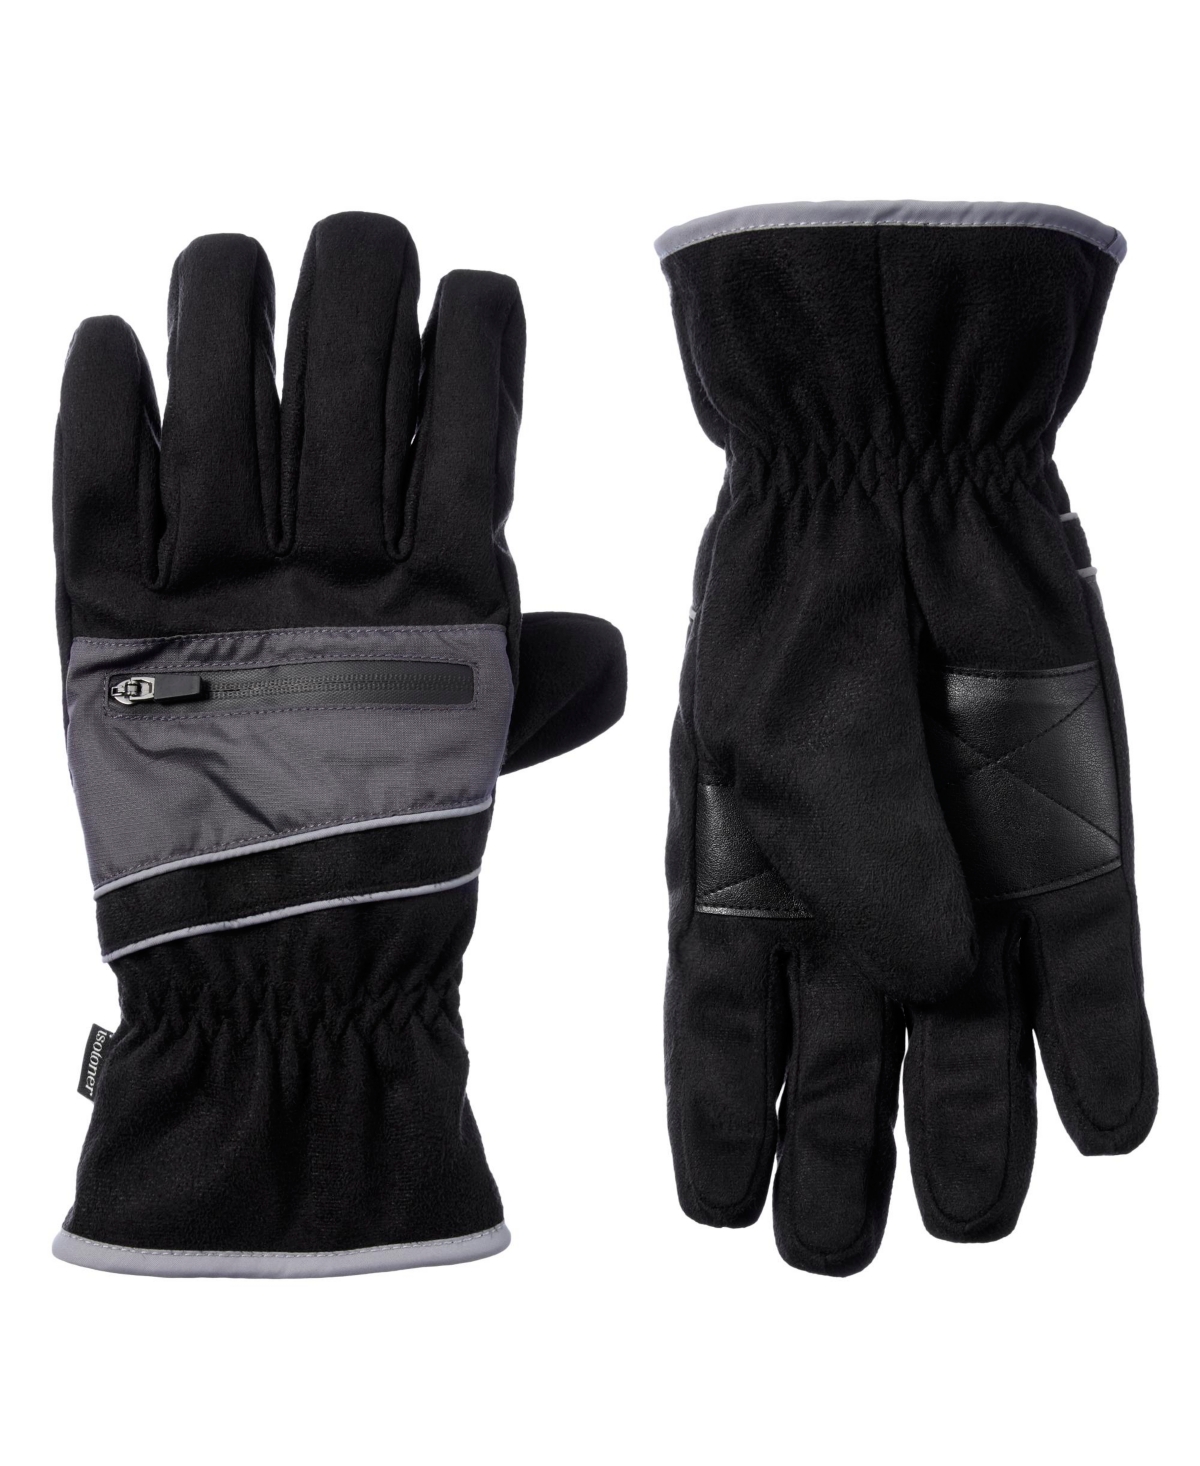 Men's Microsuede Water Repellent Gloves with Zipper Pouch - Lead